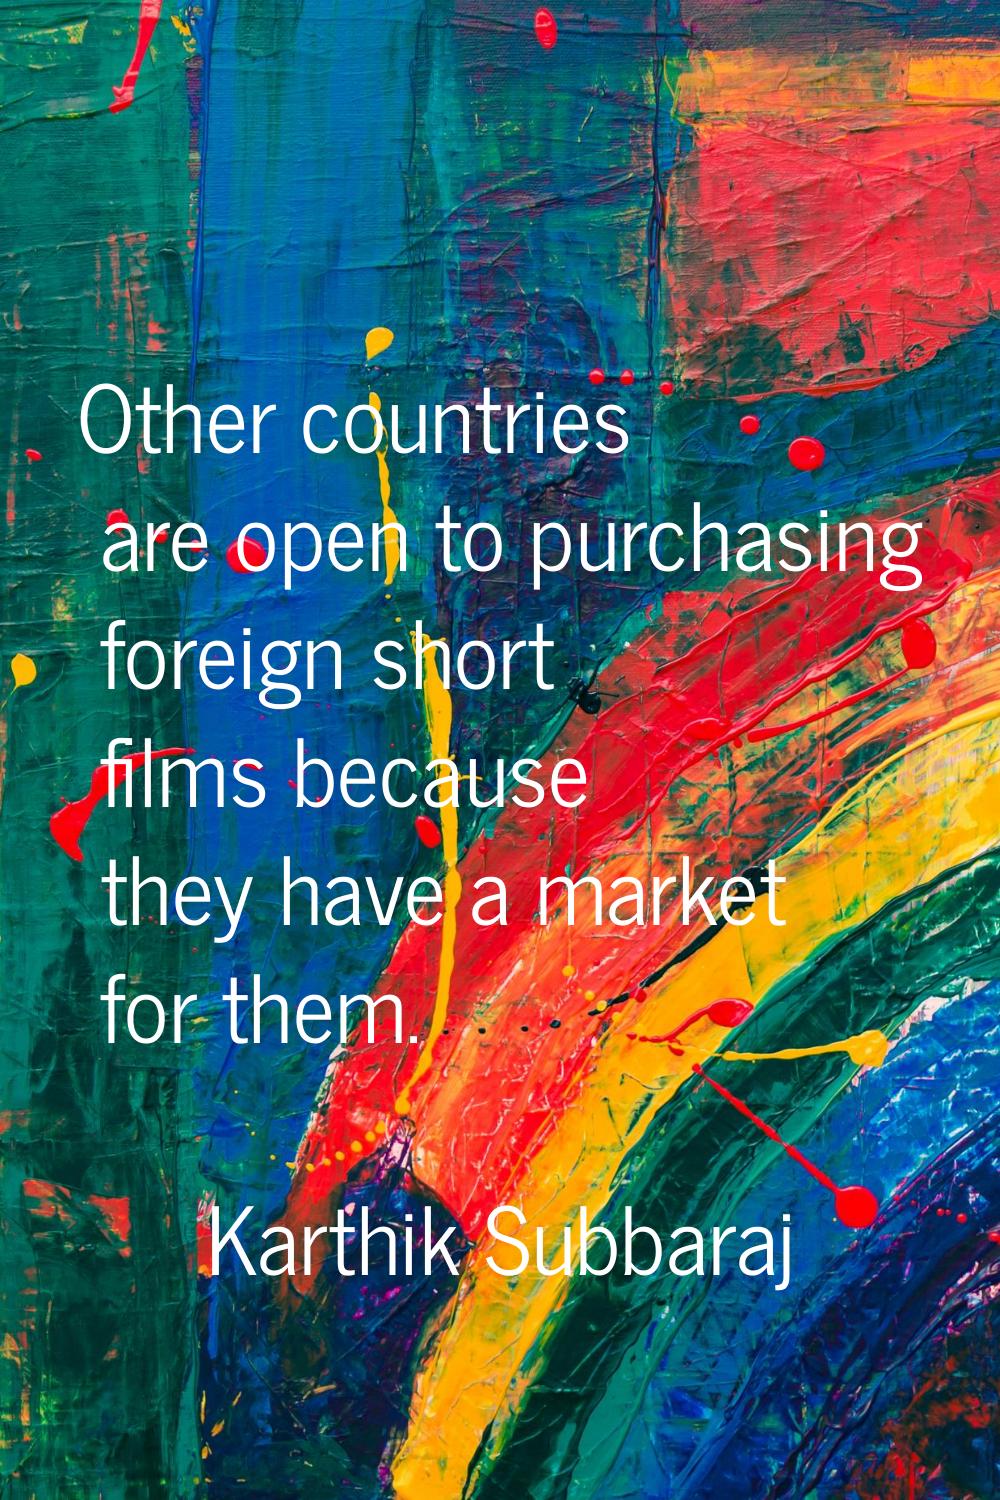 Other countries are open to purchasing foreign short films because they have a market for them.